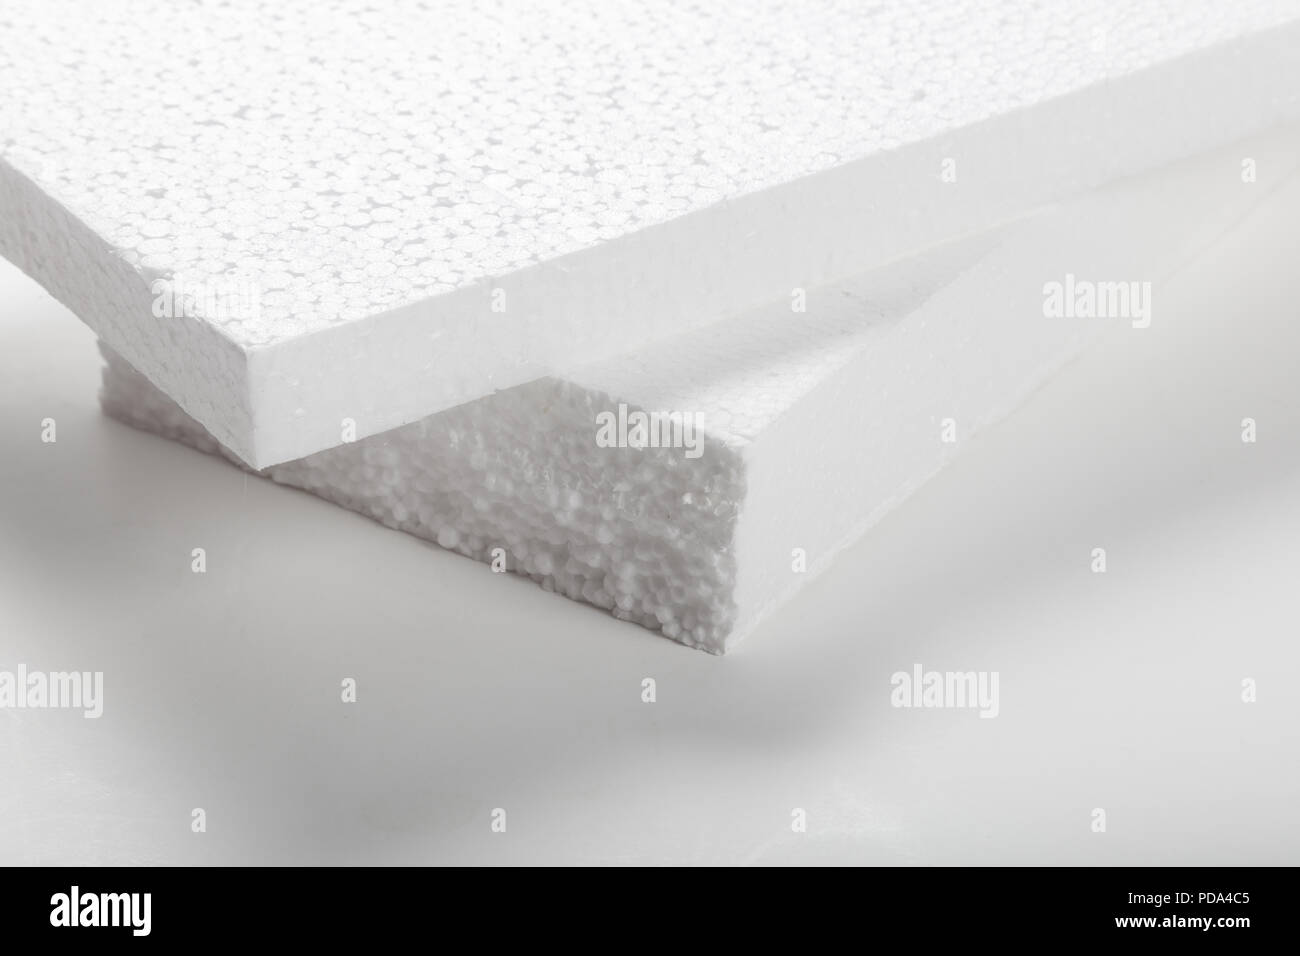 Foam block Black and White Stock Photos & Images - Alamy